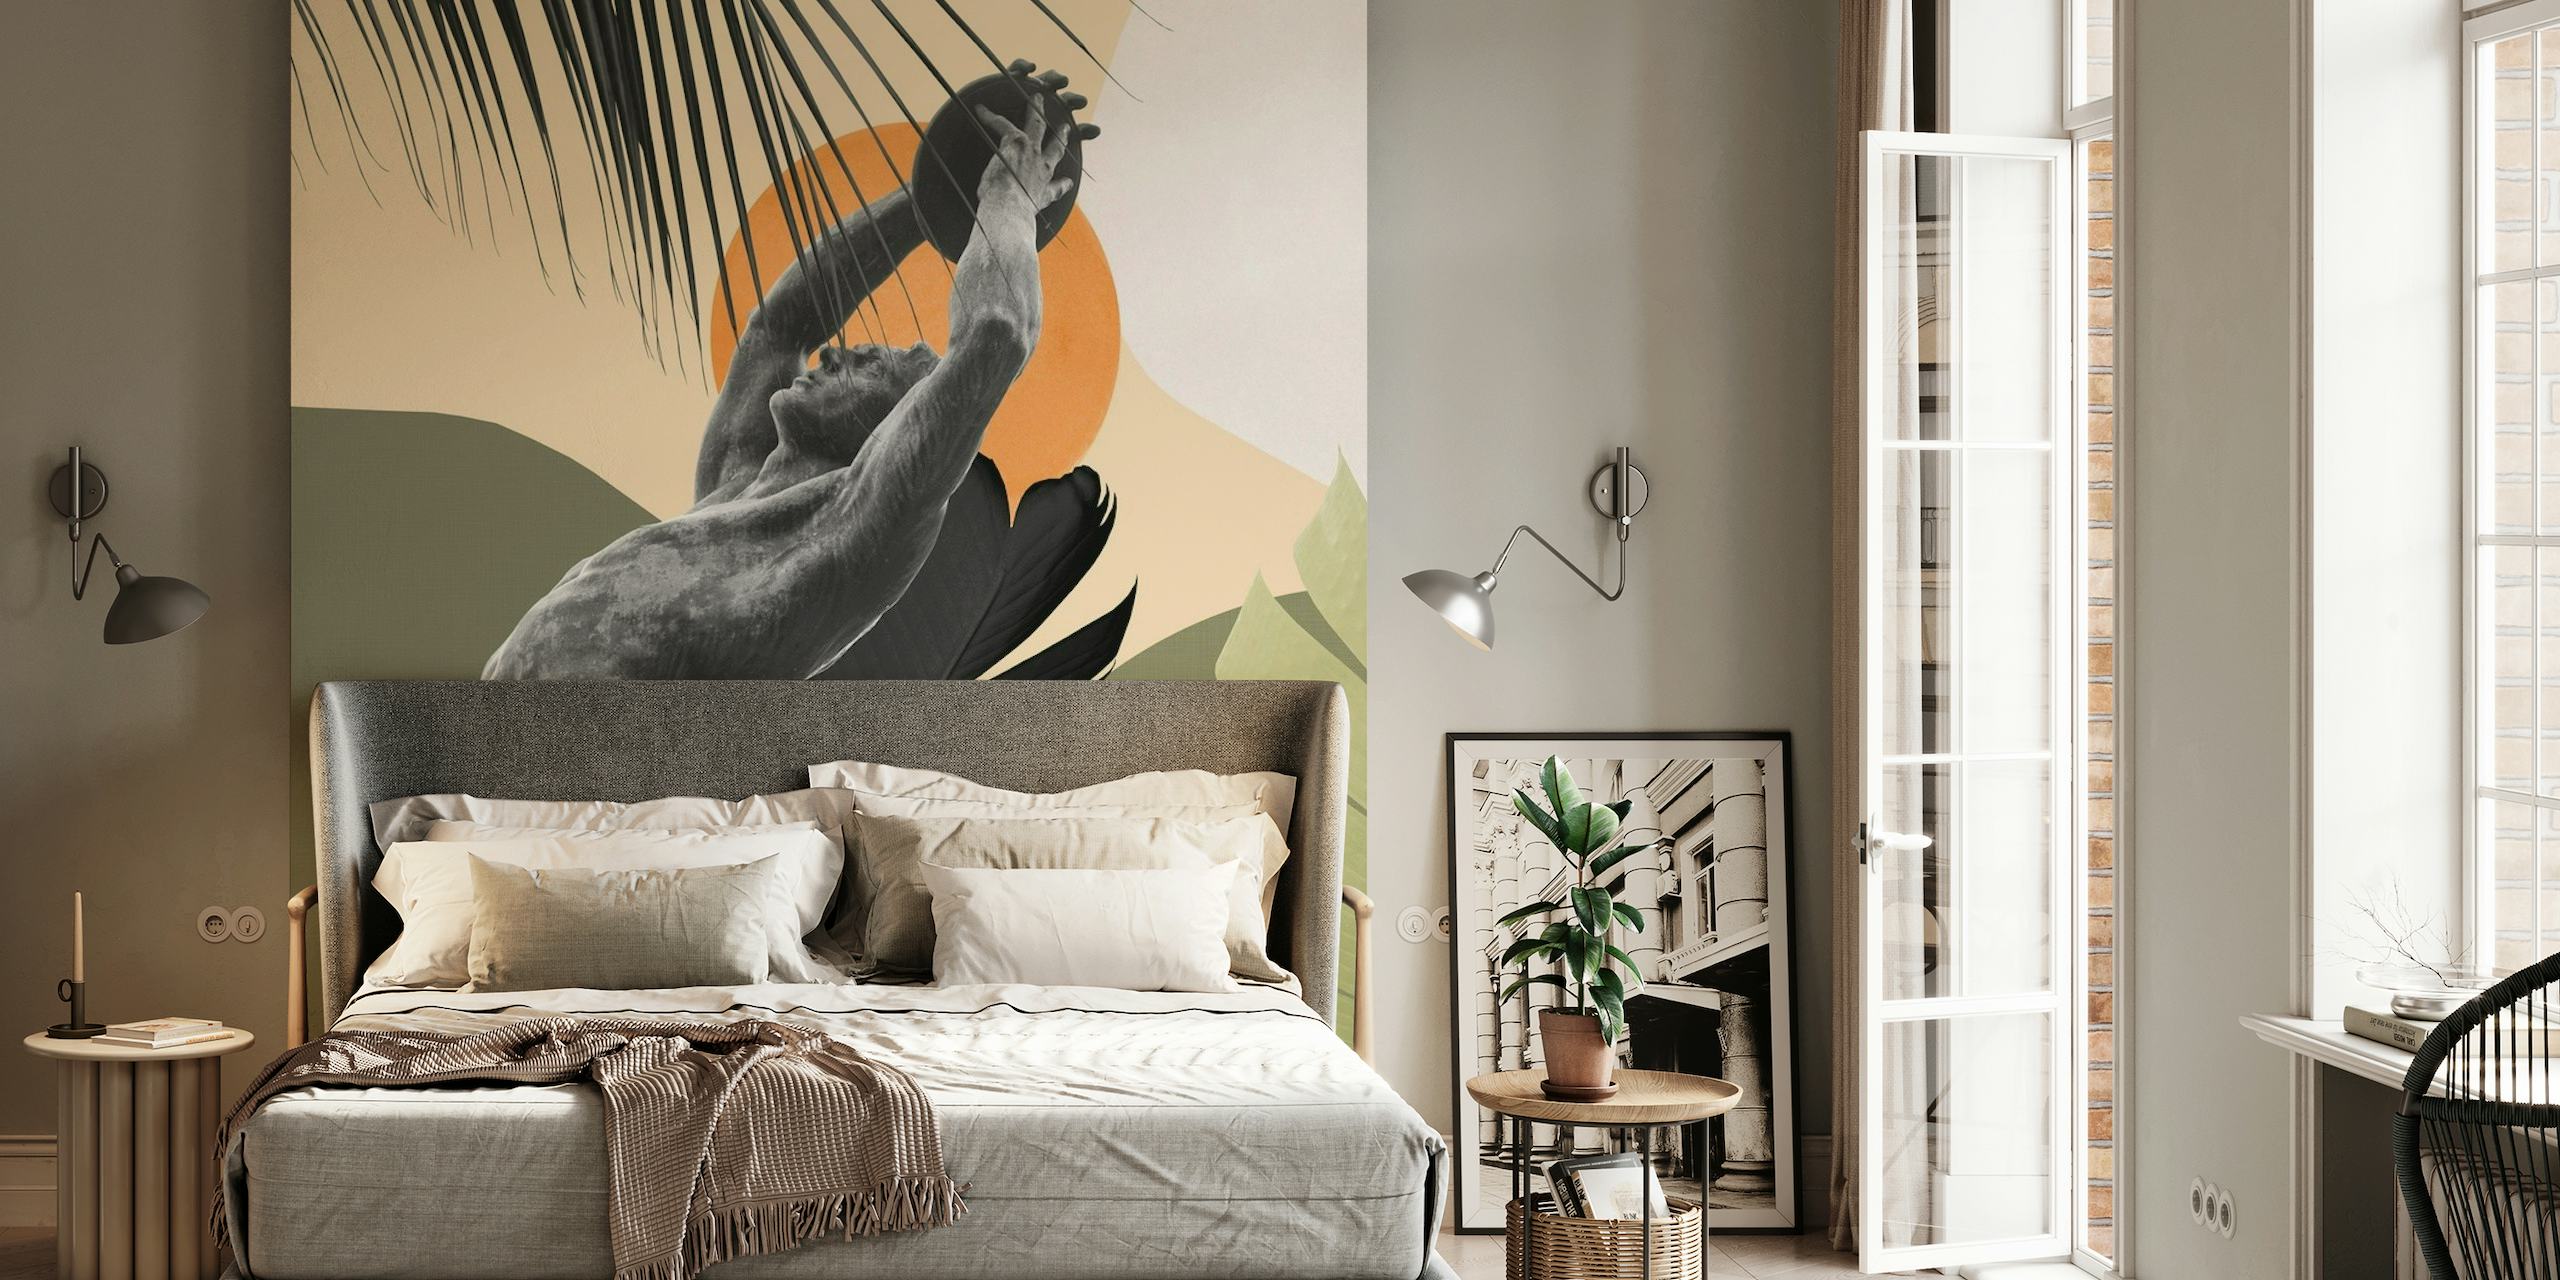 Artistic wall mural of an Olympic discus thrower in action, surrounded by tropical foliage and a warm-colored backdrop